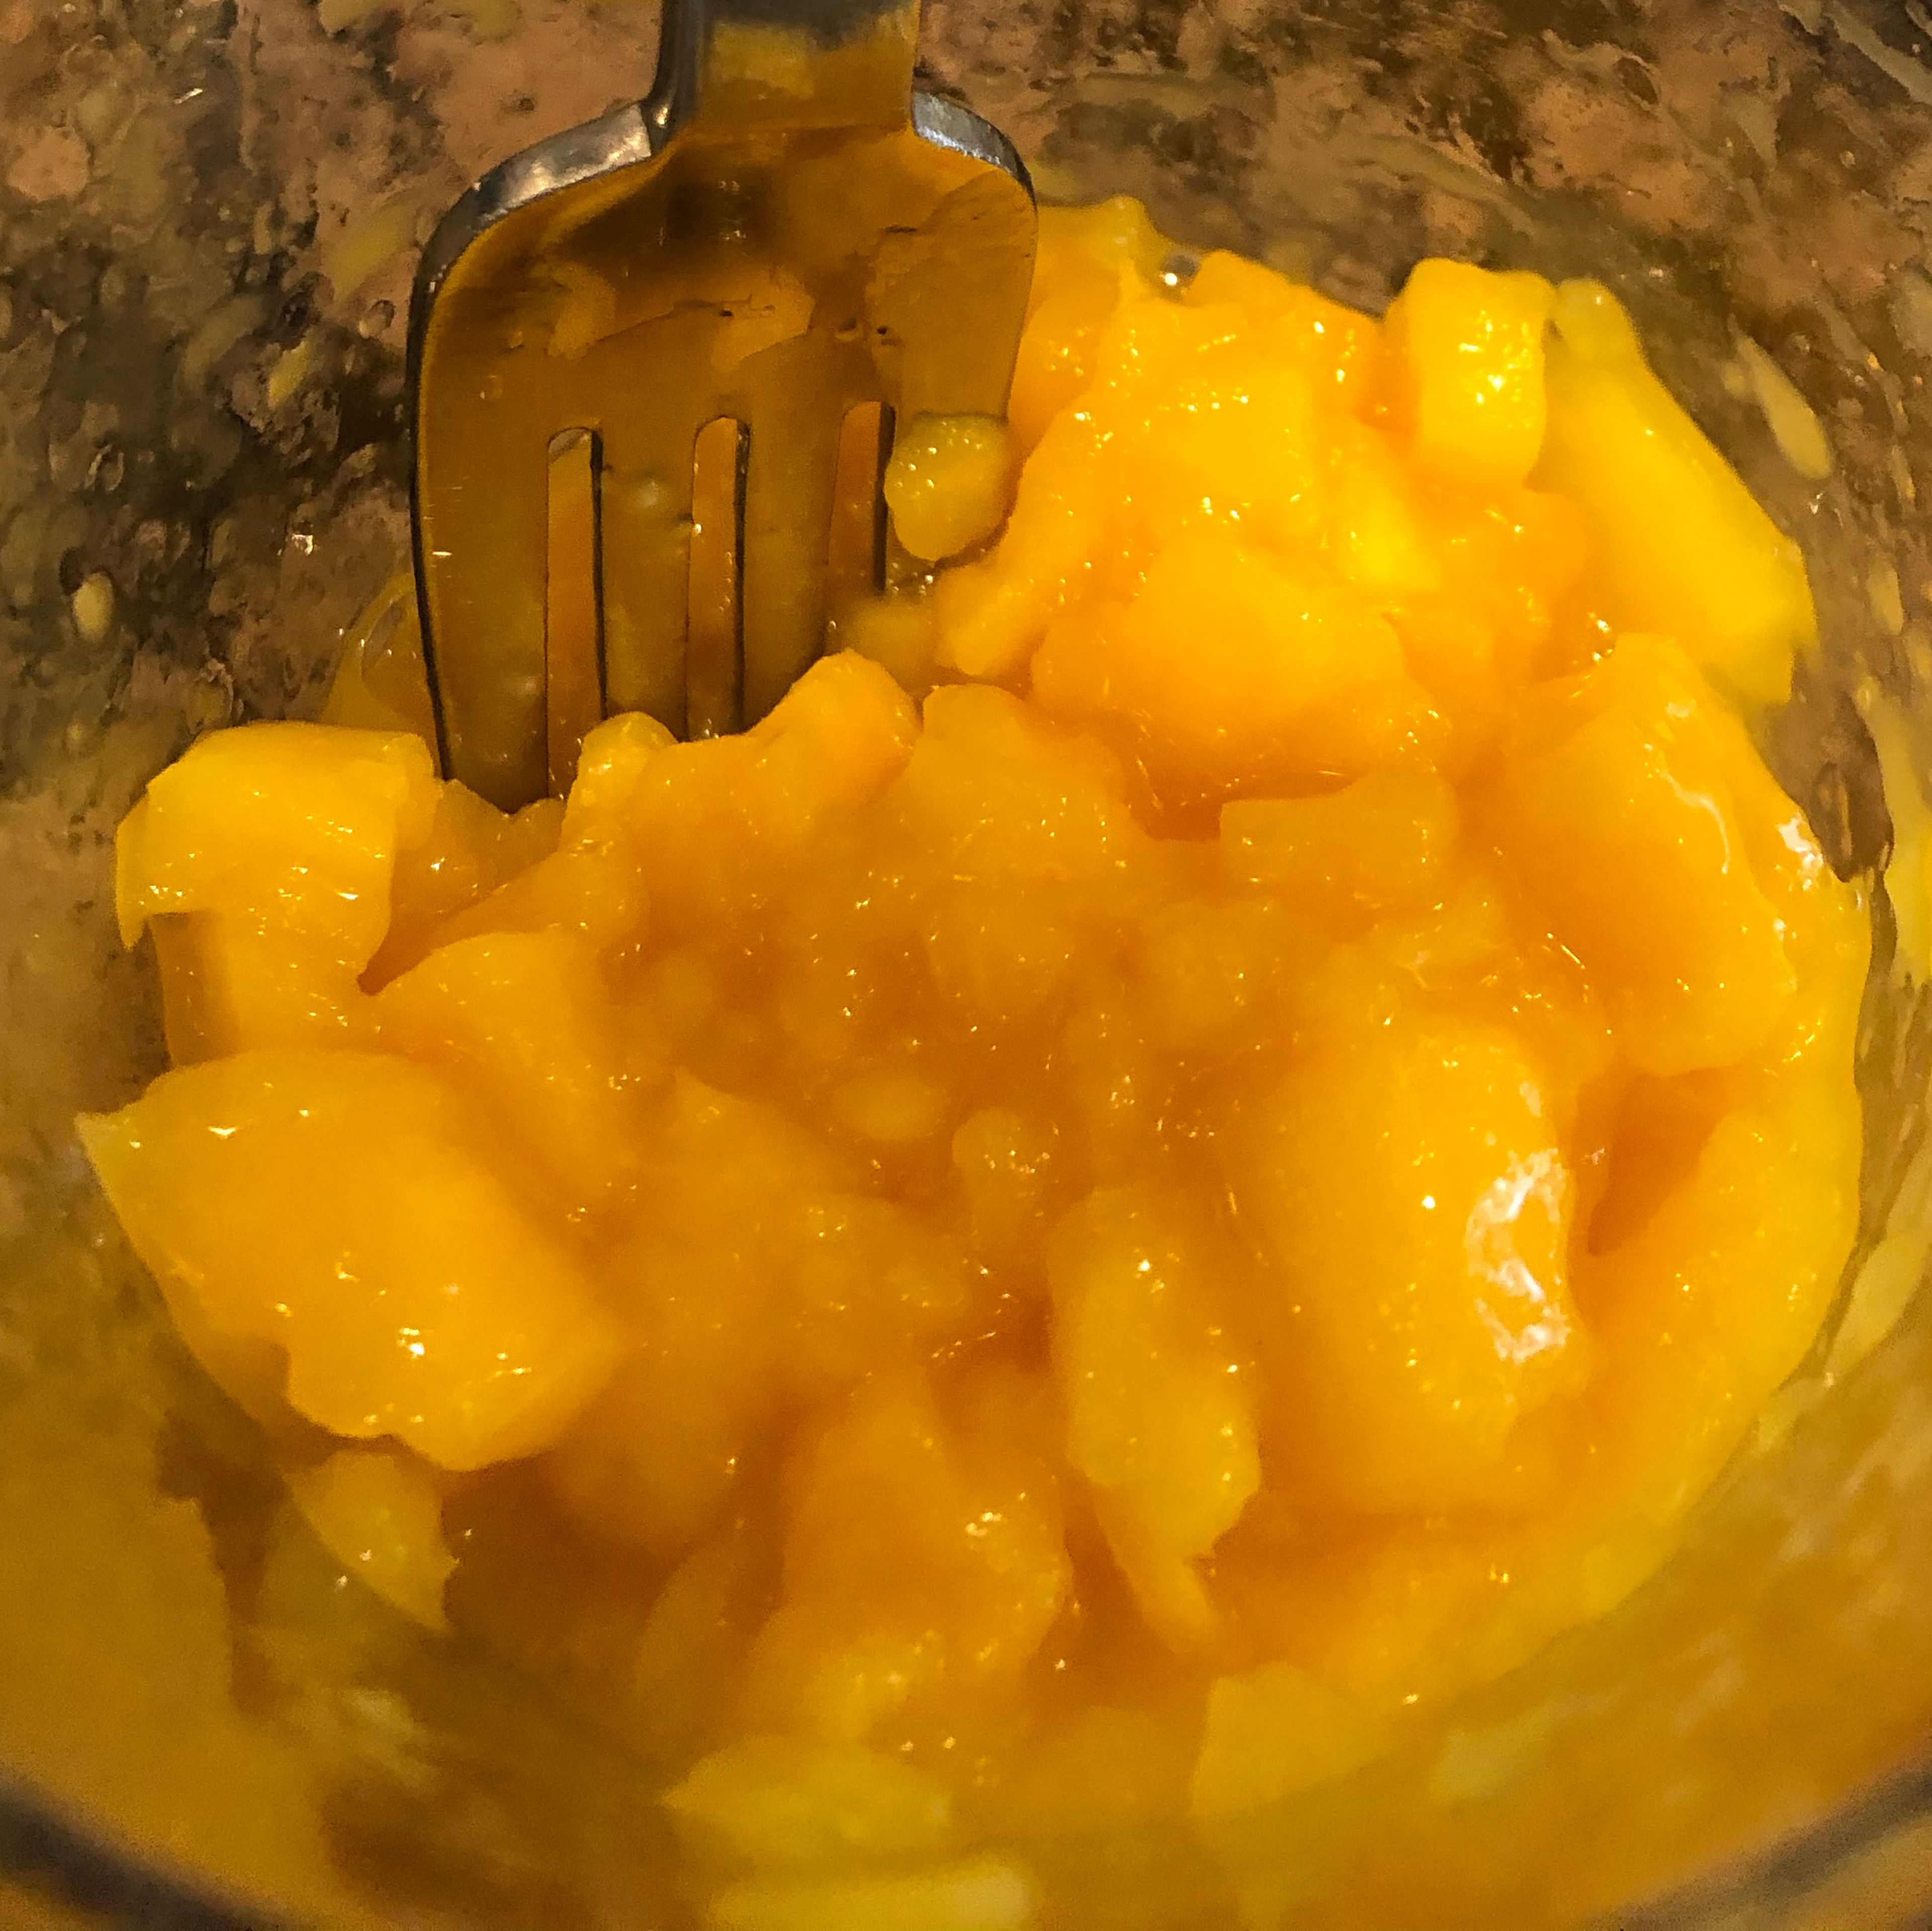 Use an immersion blender to partially blend the mango. The mango should have some chunks still in it, but should also have some fully blended pieces.